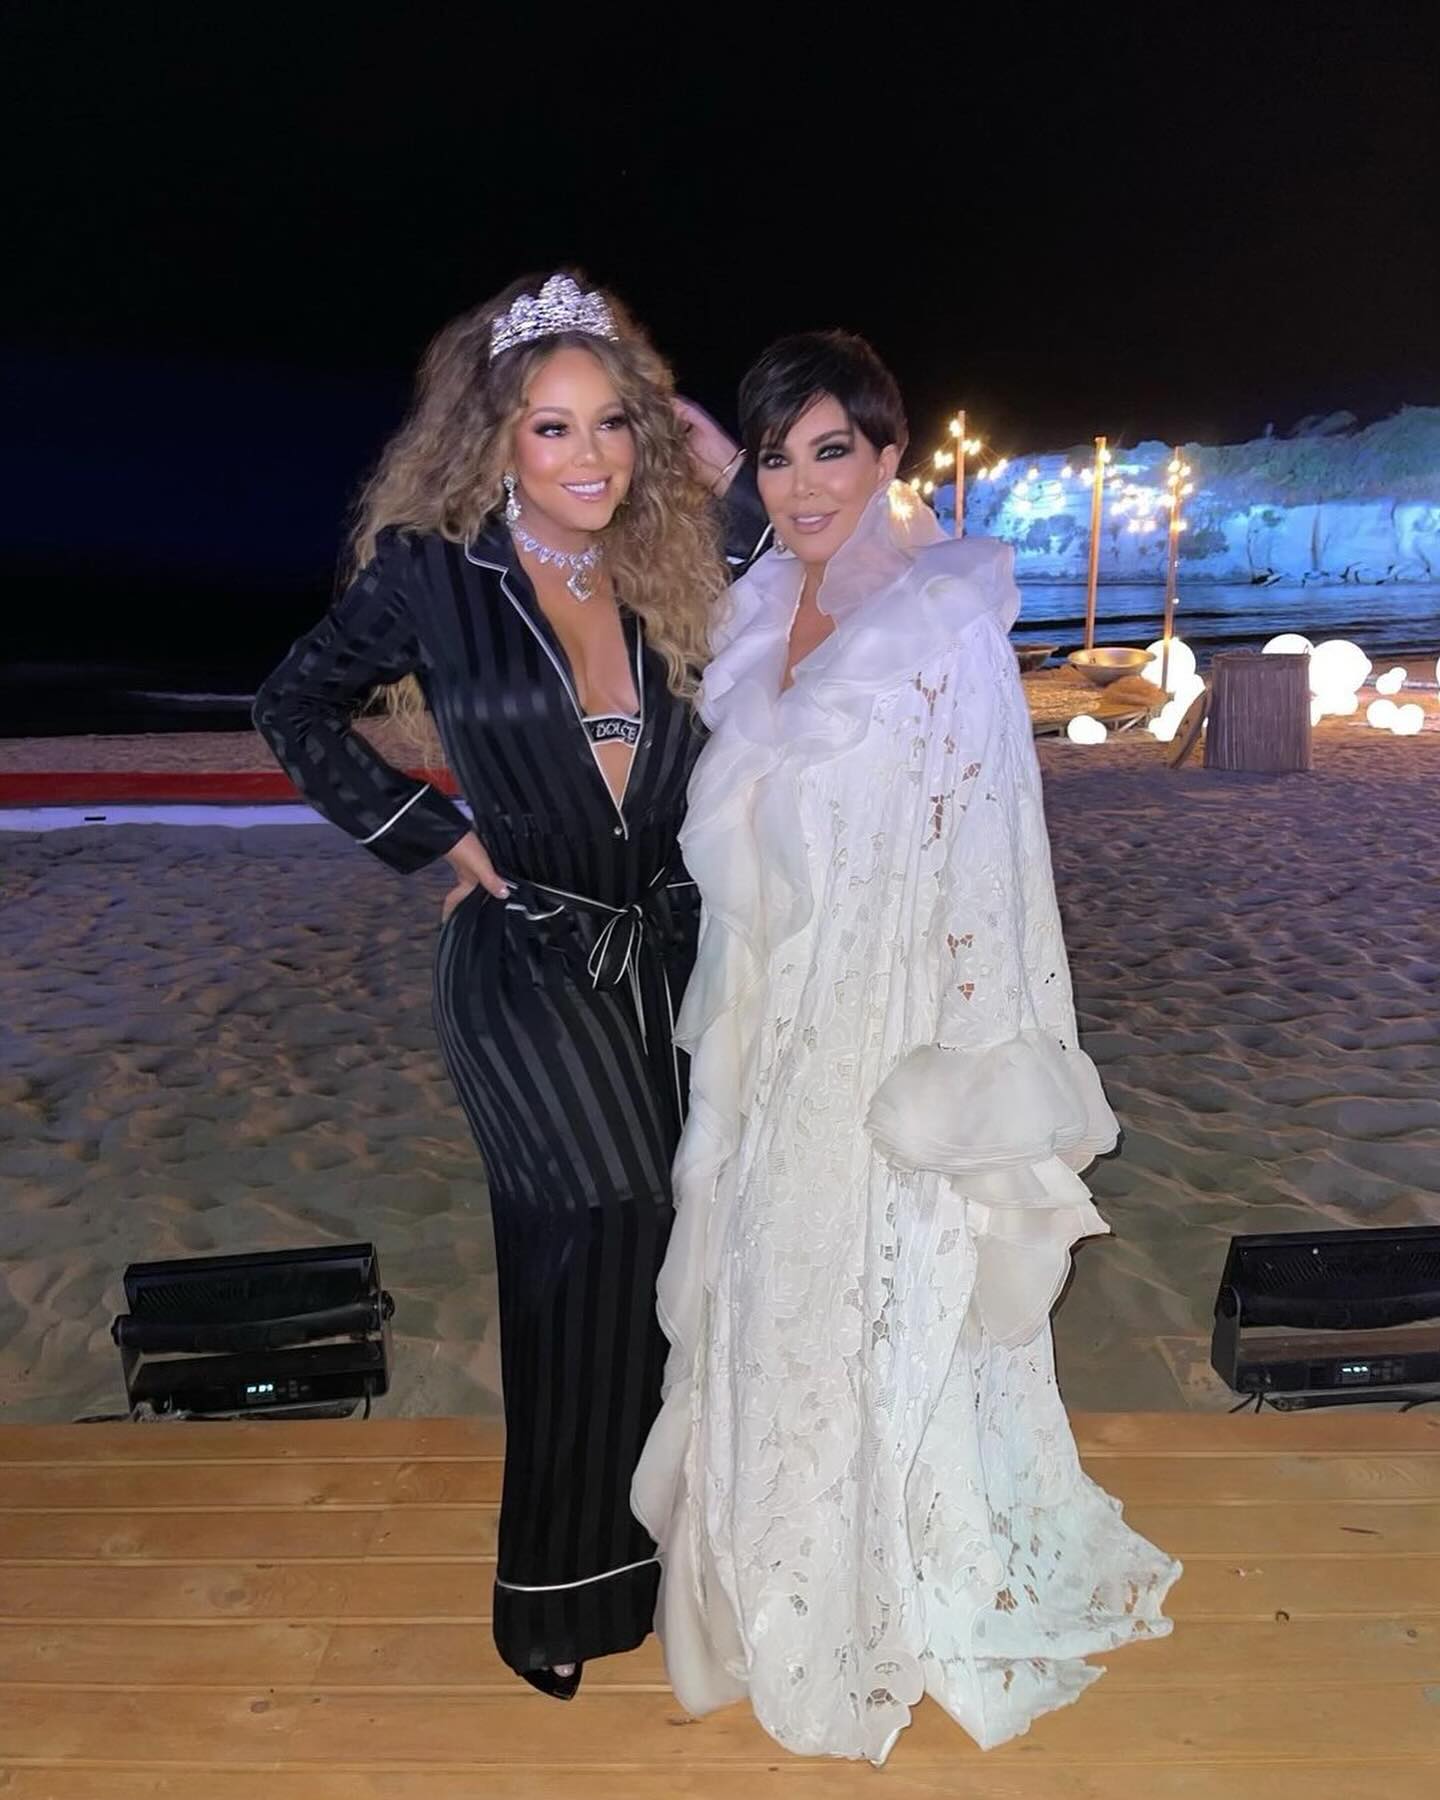 Kris and Mariah looked like they were living a life of luxury in the pics